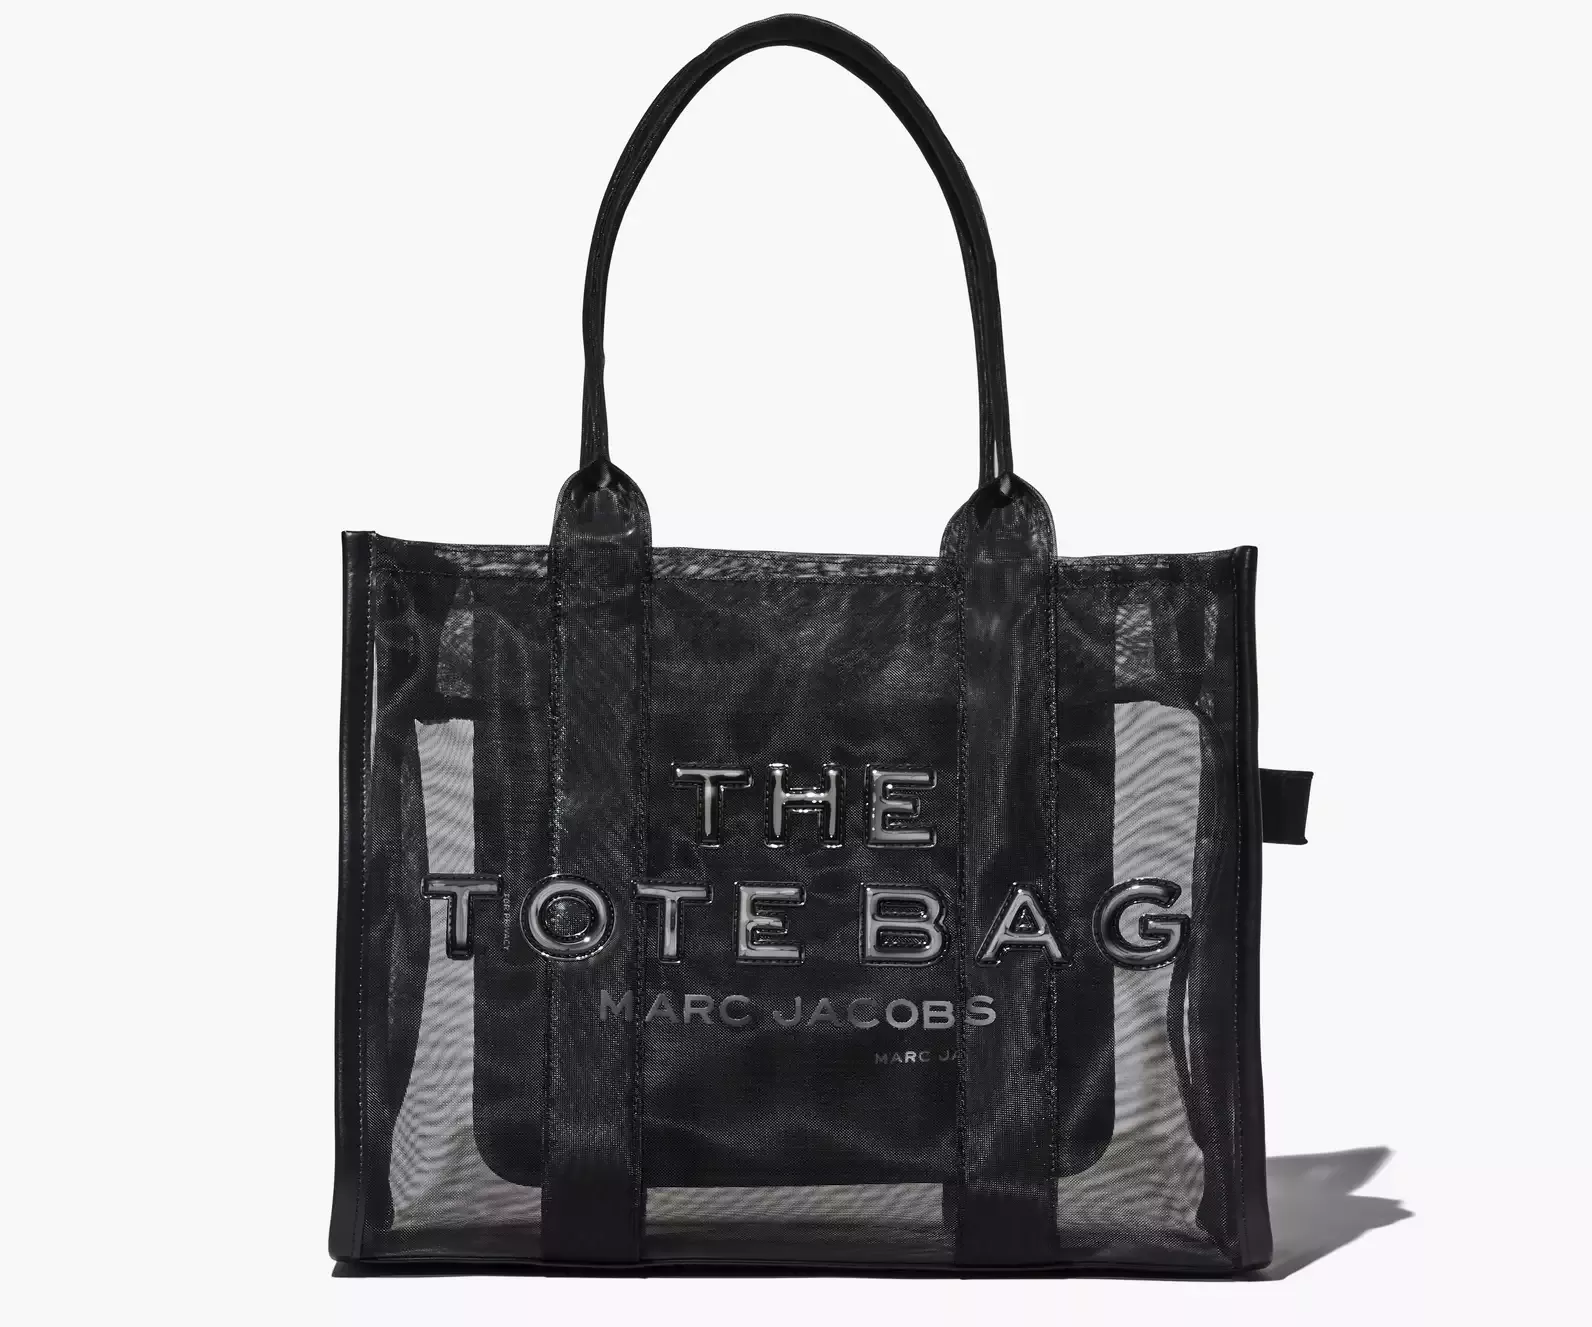 The Mesh Medium Tote Bag curated on LTK